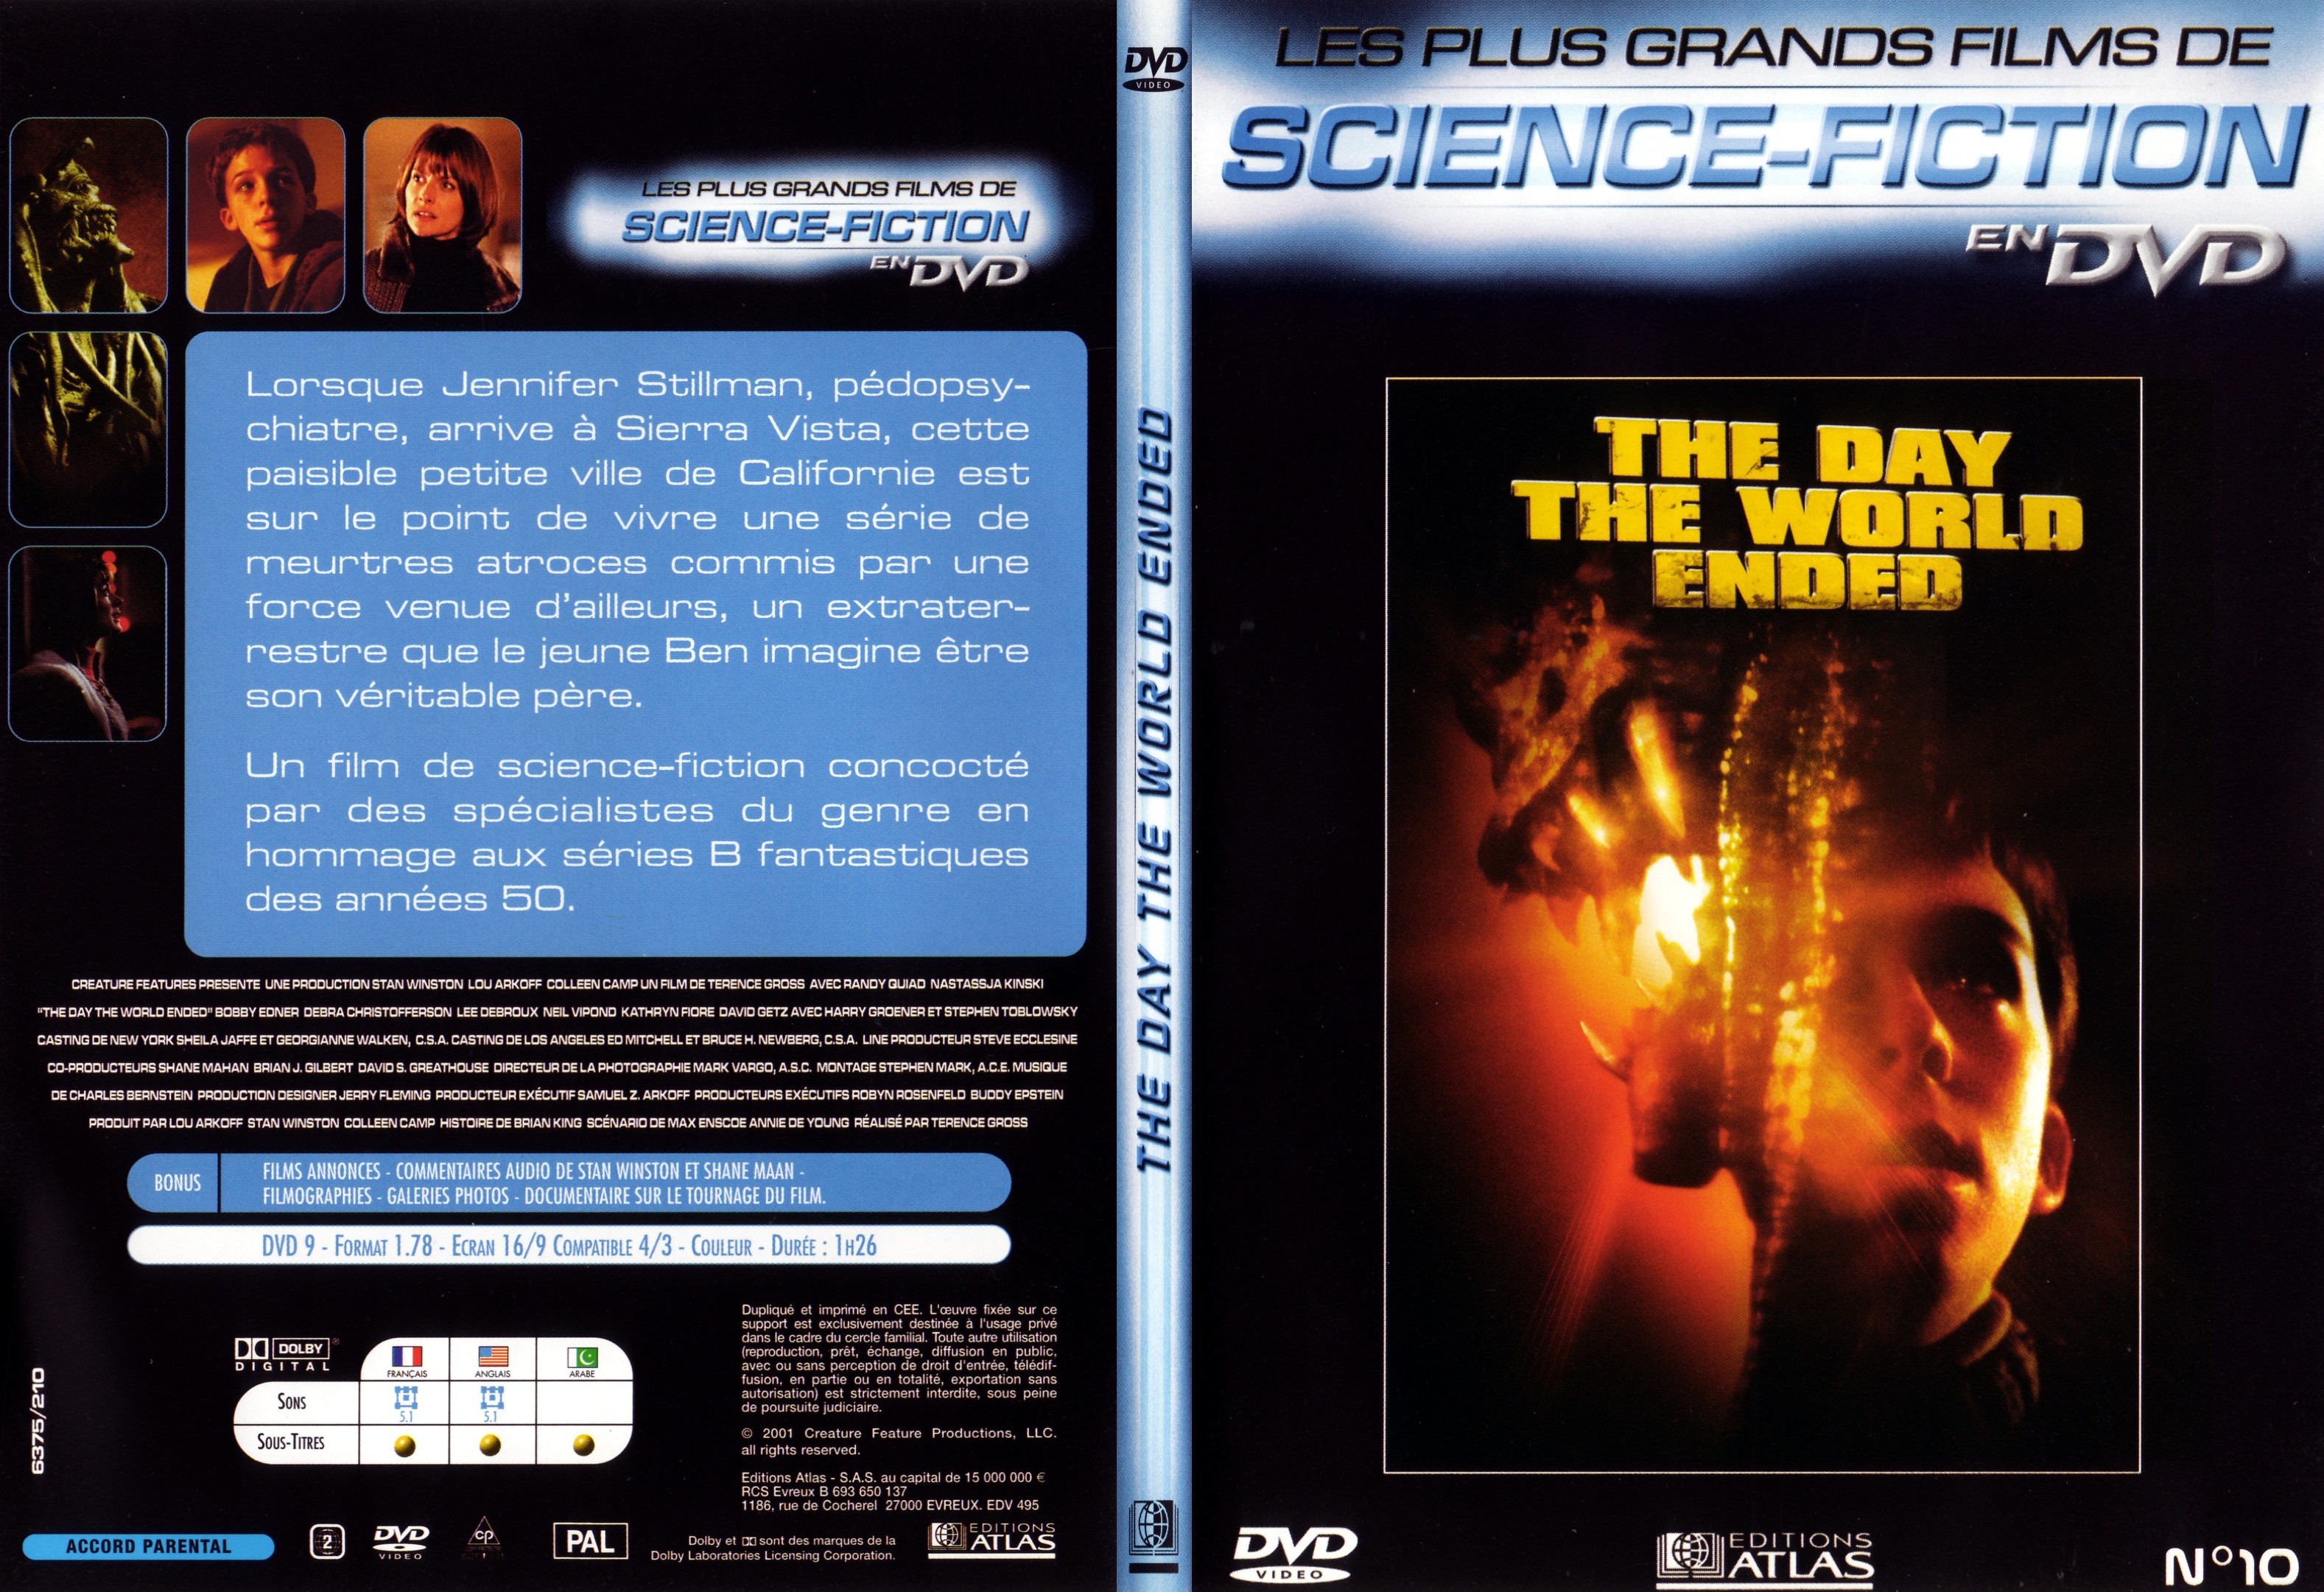 Jaquette DVD The day the world ended - SLIM